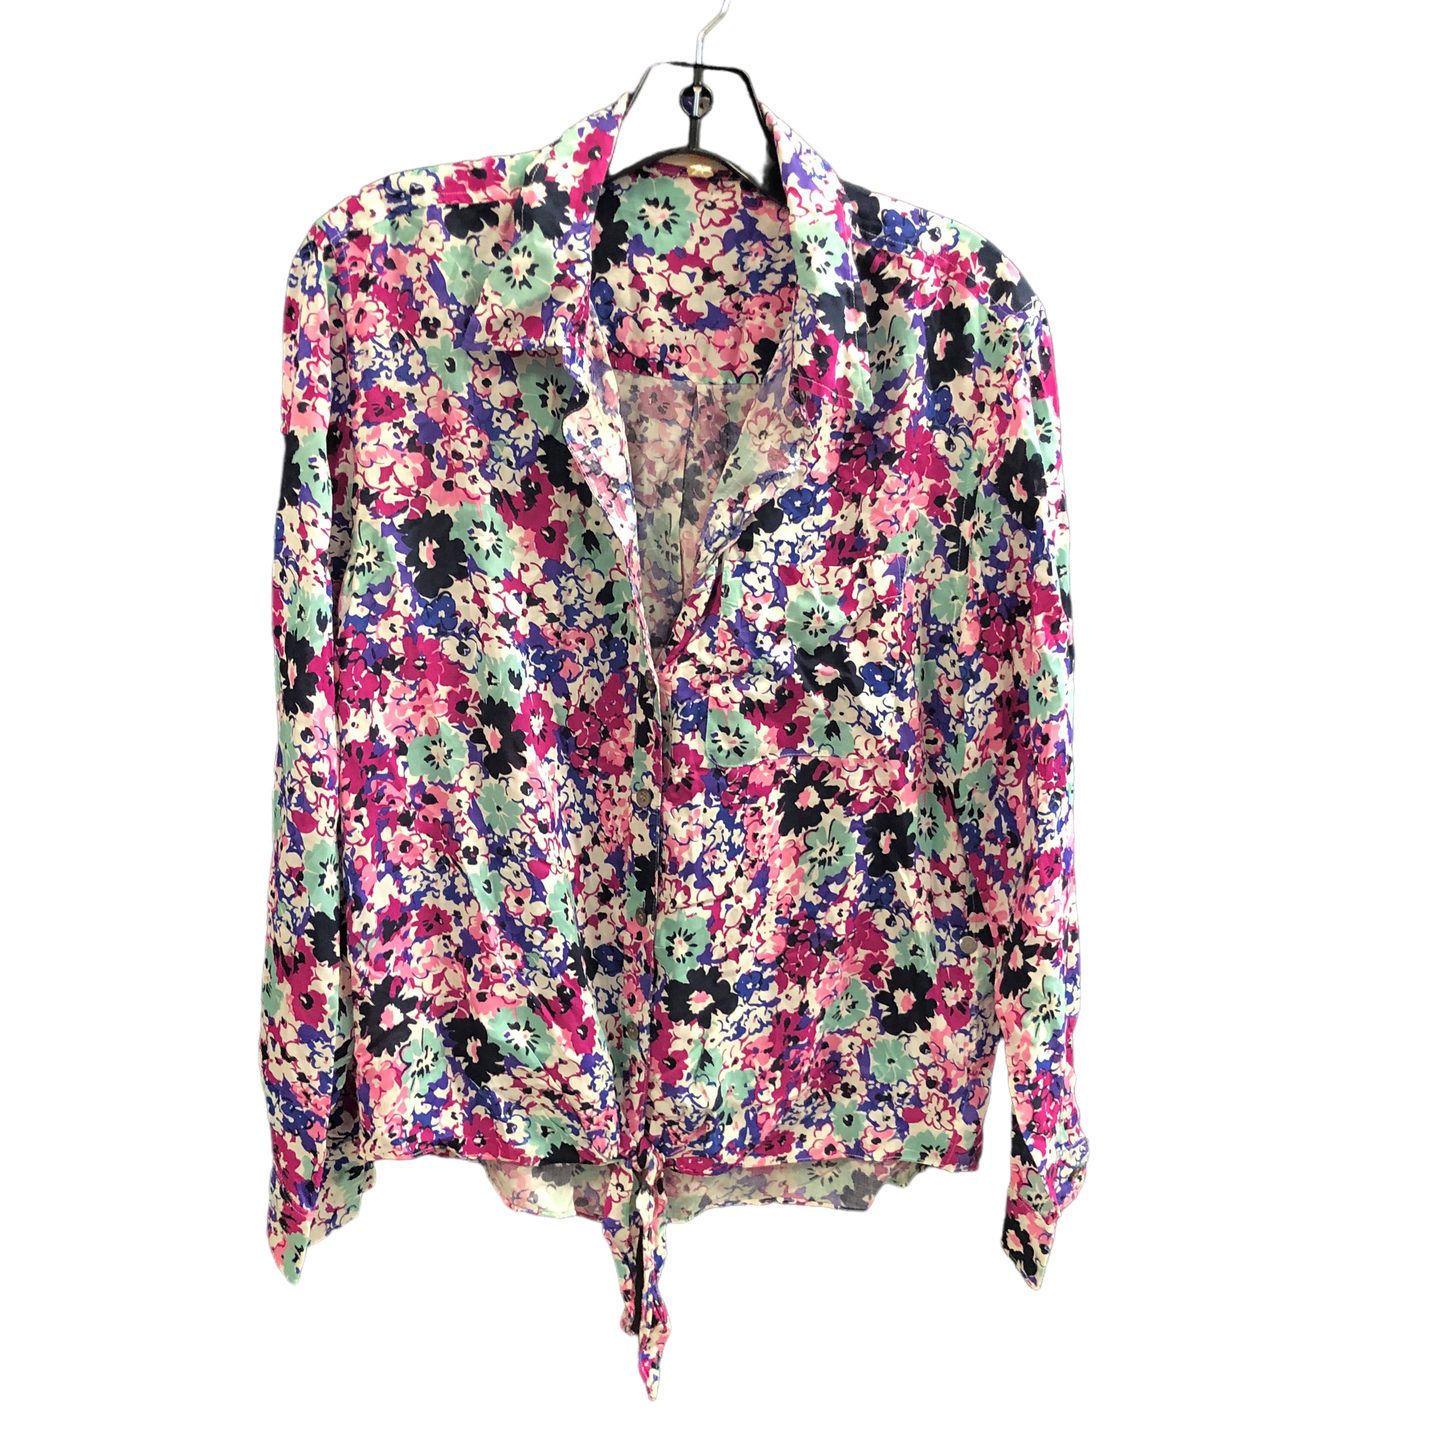 Floral Print Top Long Sleeve Two By Vince Camuto, Size S